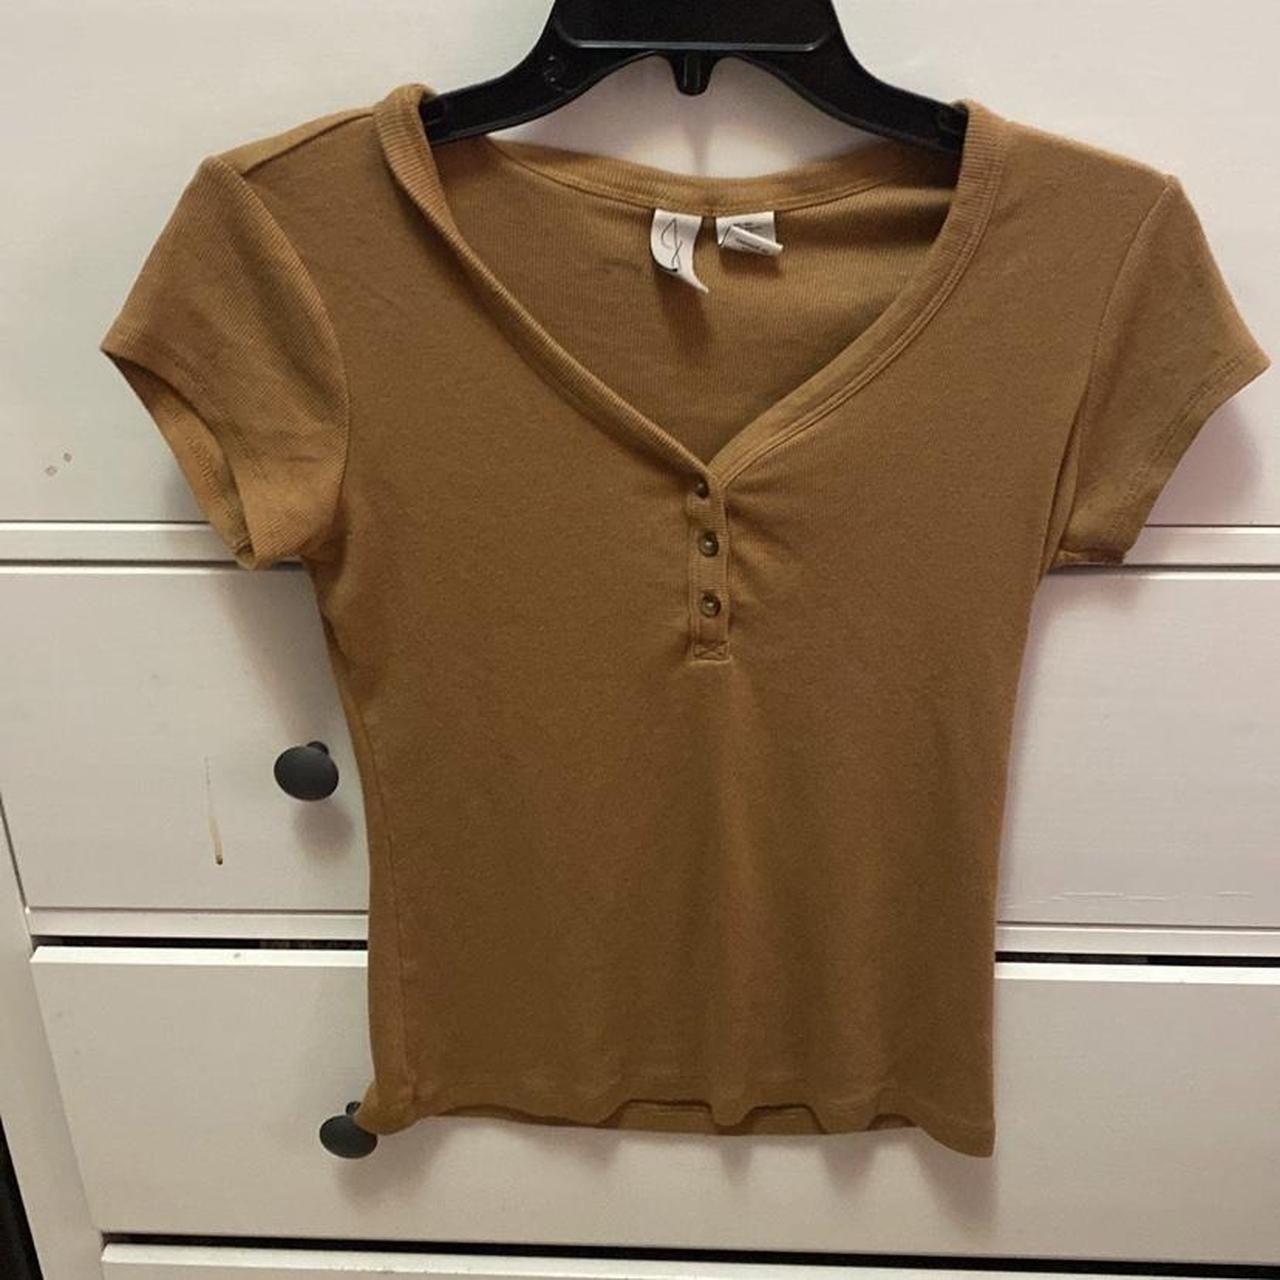 Joie Women's Brown and Tan Shirt